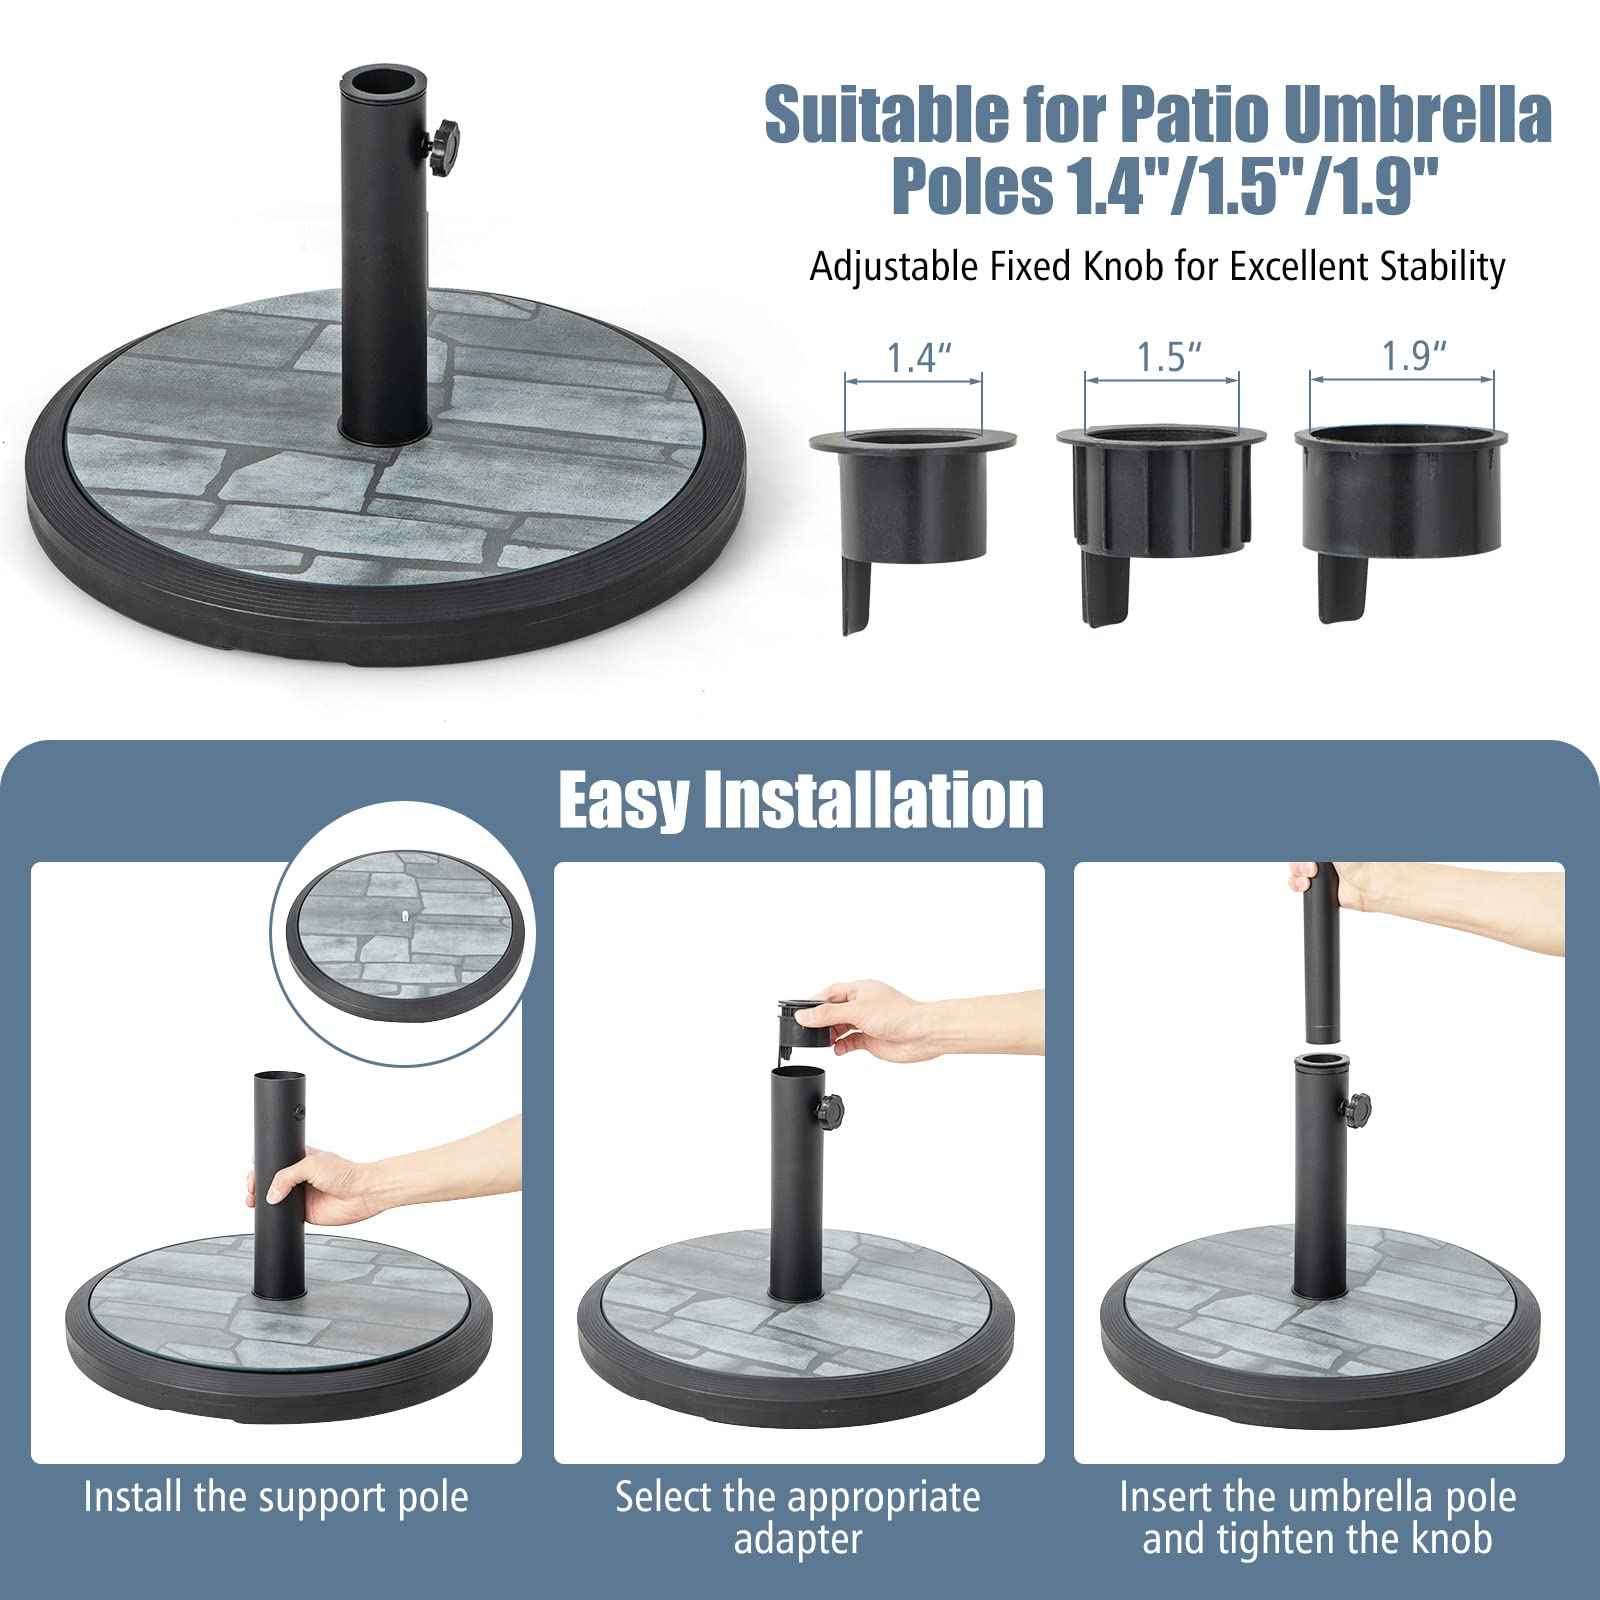 Giantex 35lbs Umbrella Base, Heavy Duty Patio Umbrella Stand with Built-in Cement, Special Stone Pattern